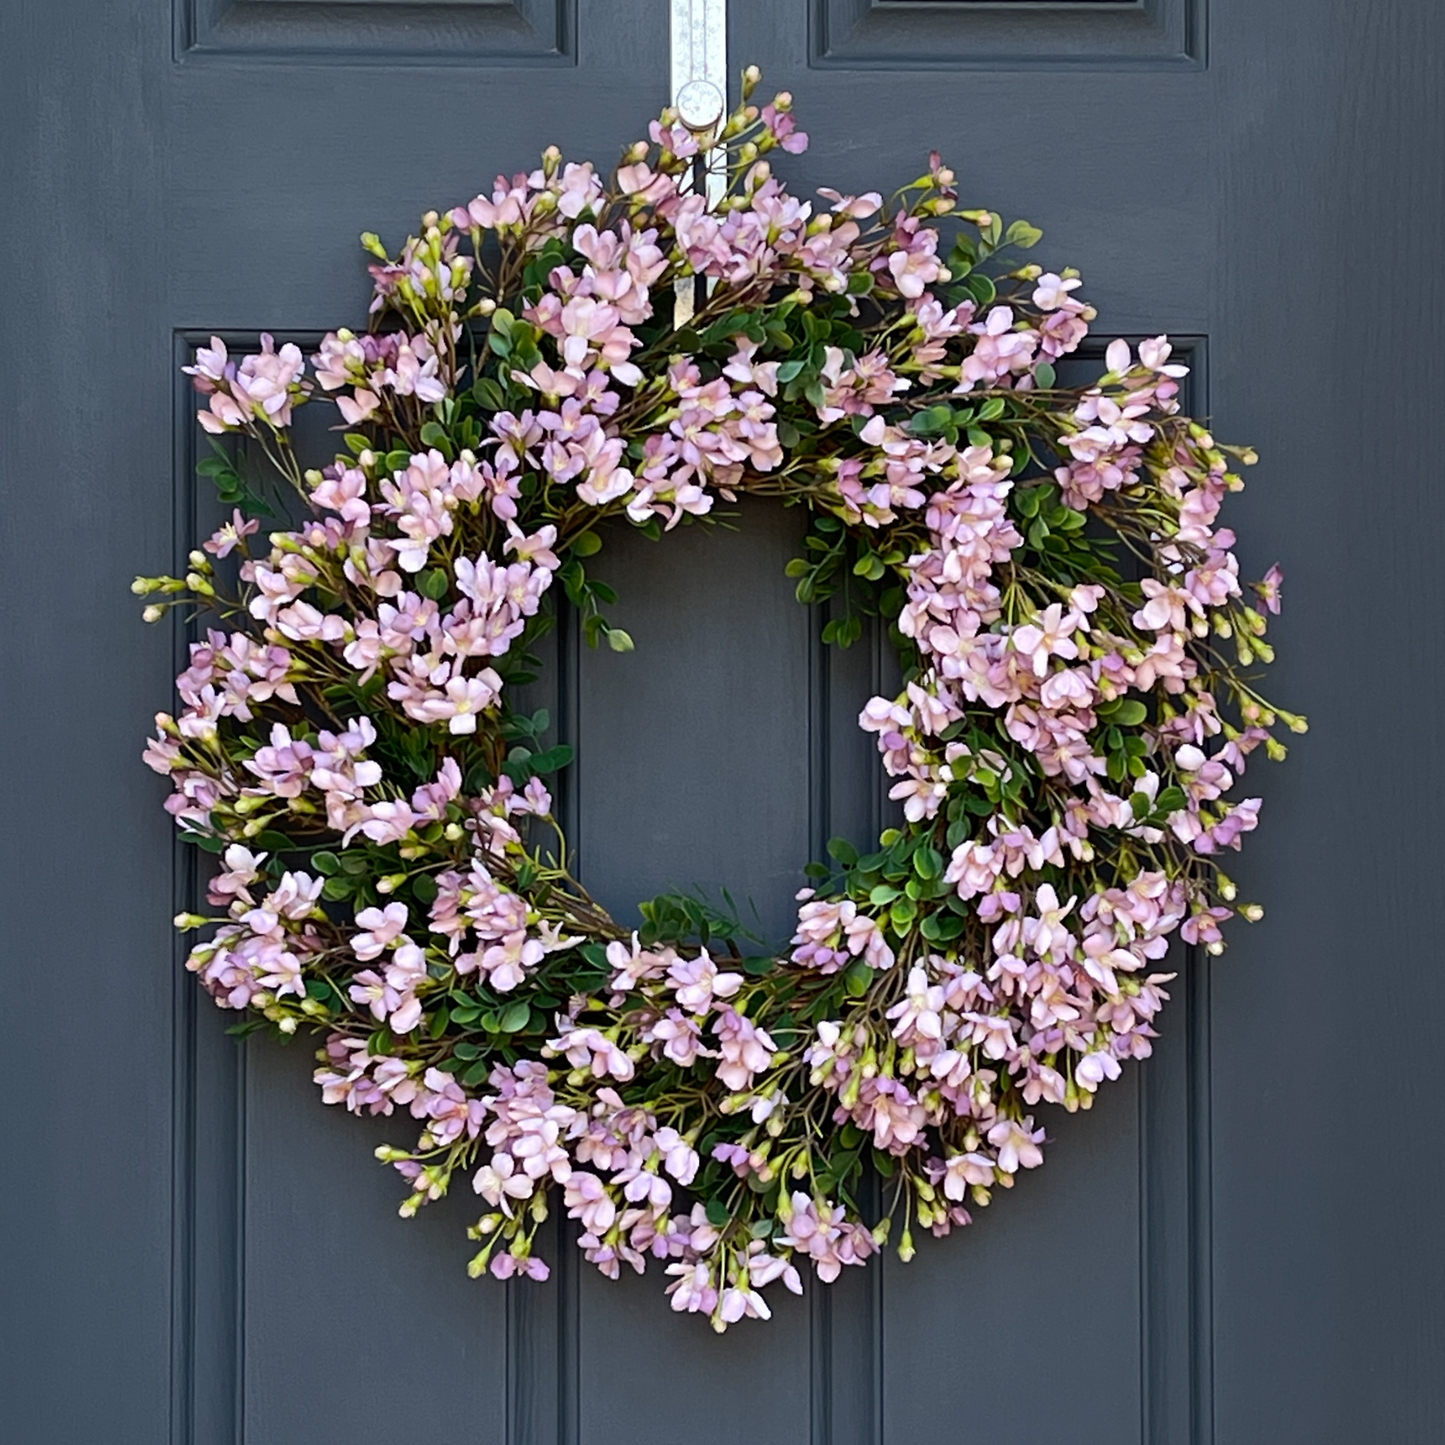 24" spring front door wreath with lavender blossoms and green leaves.